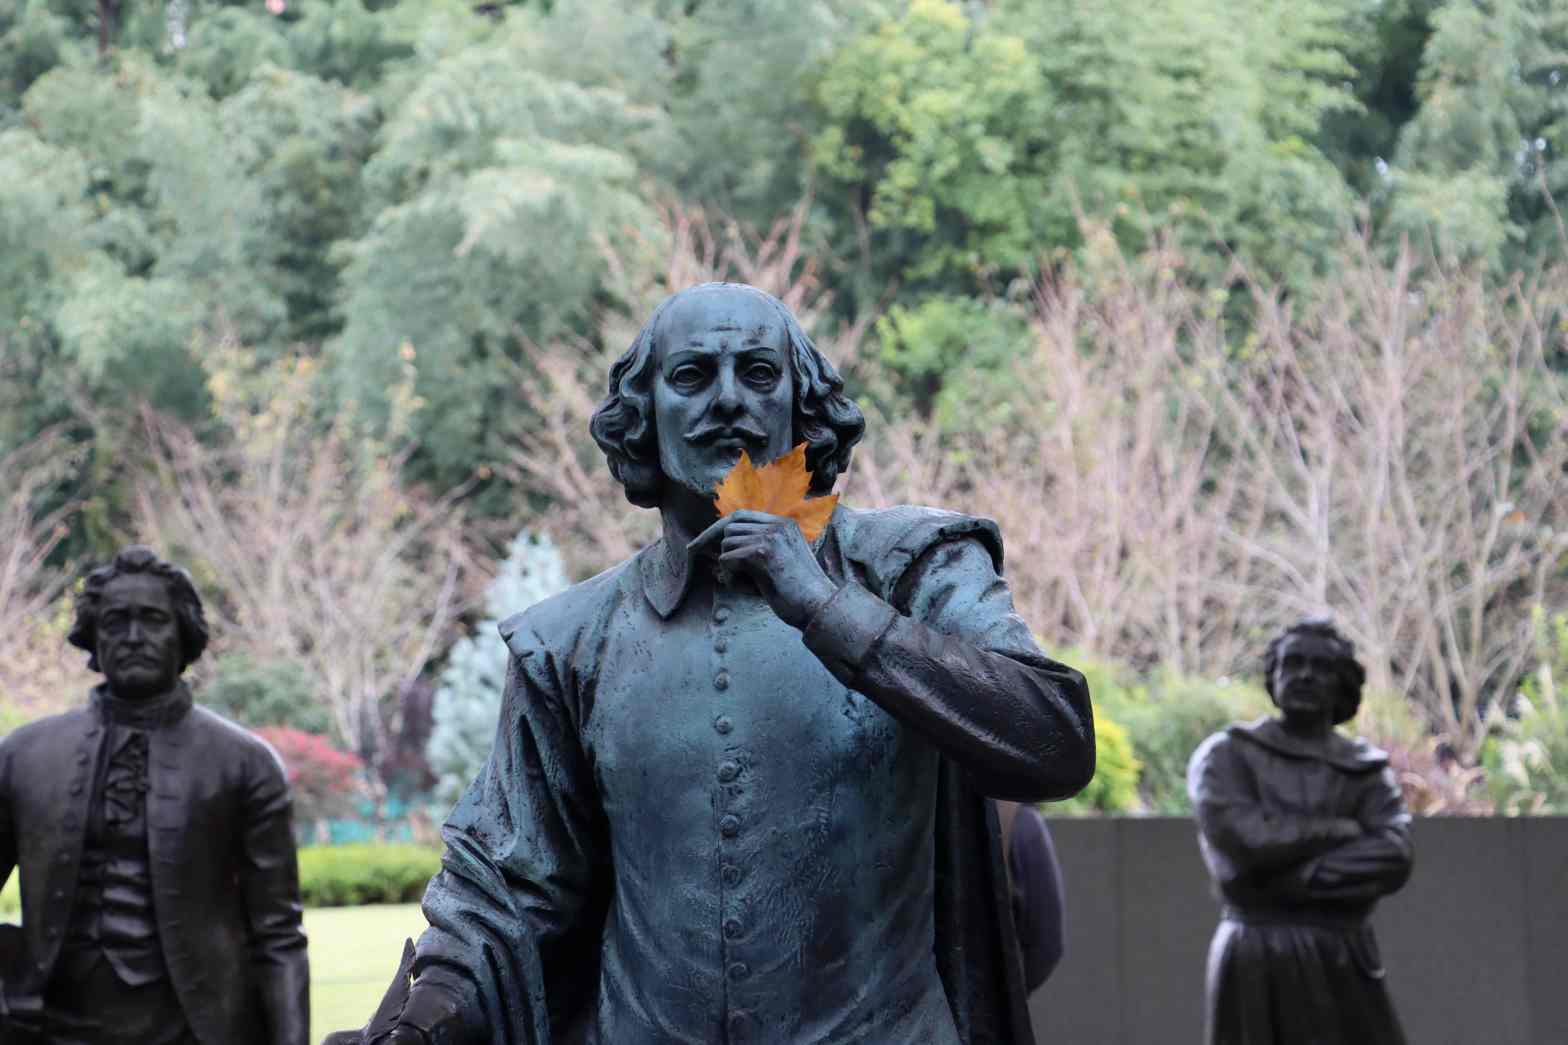 A statue of William Shakespear, with his hand up by his chin. There's a maple leaf sitting in the gap between his hand and chin, making it seem as if he's holding it.